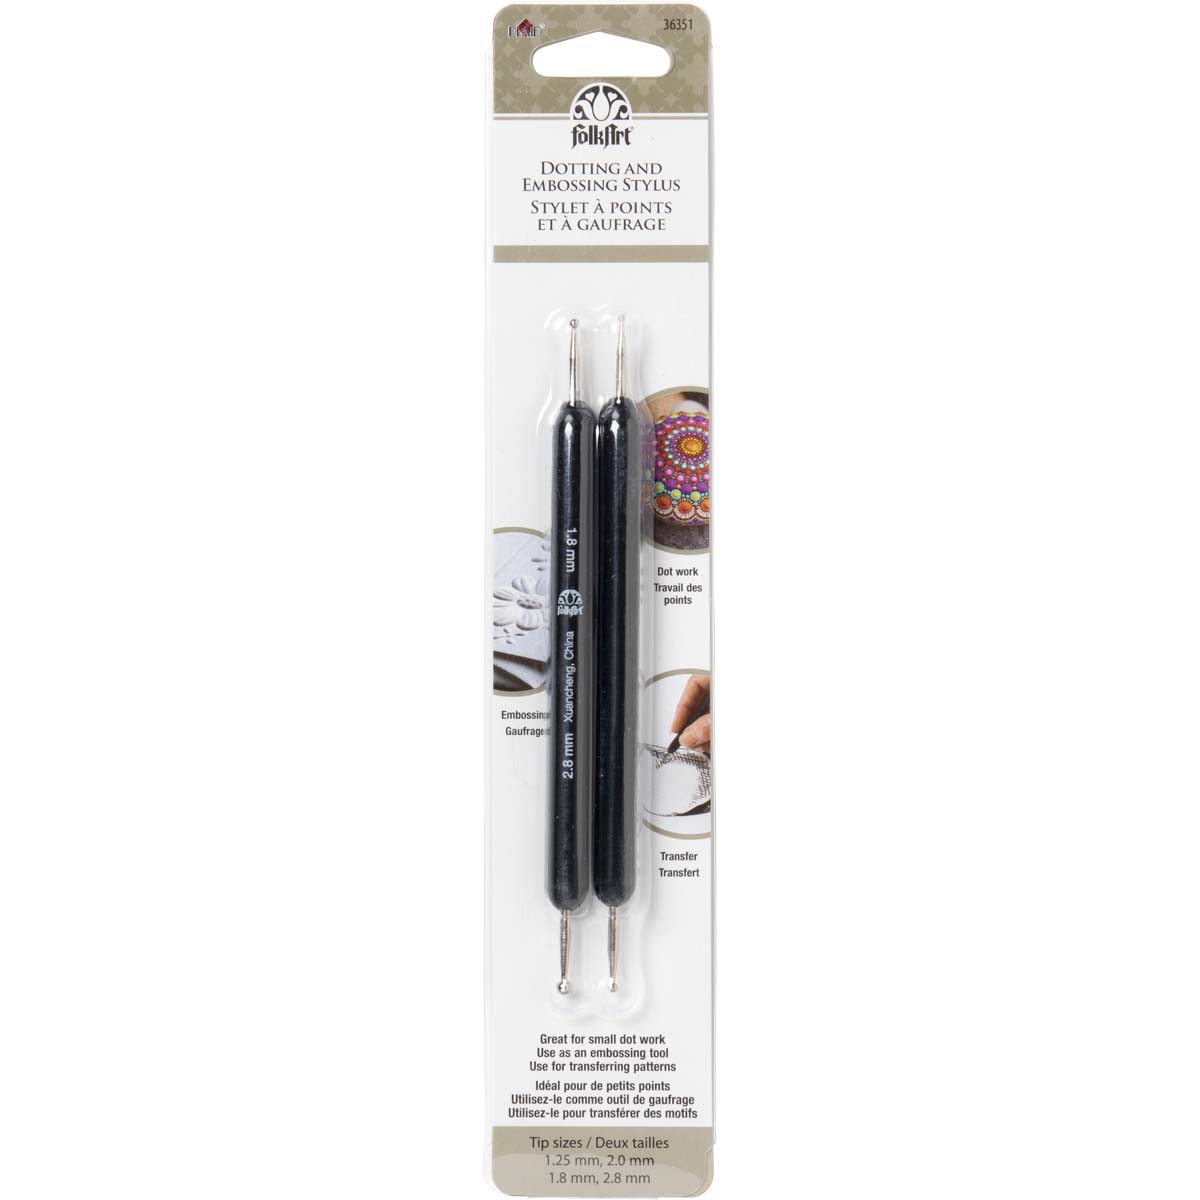 FolkArt ® Painting Tools - Dotting and Embossing Stylus, 2 pc. - 36351